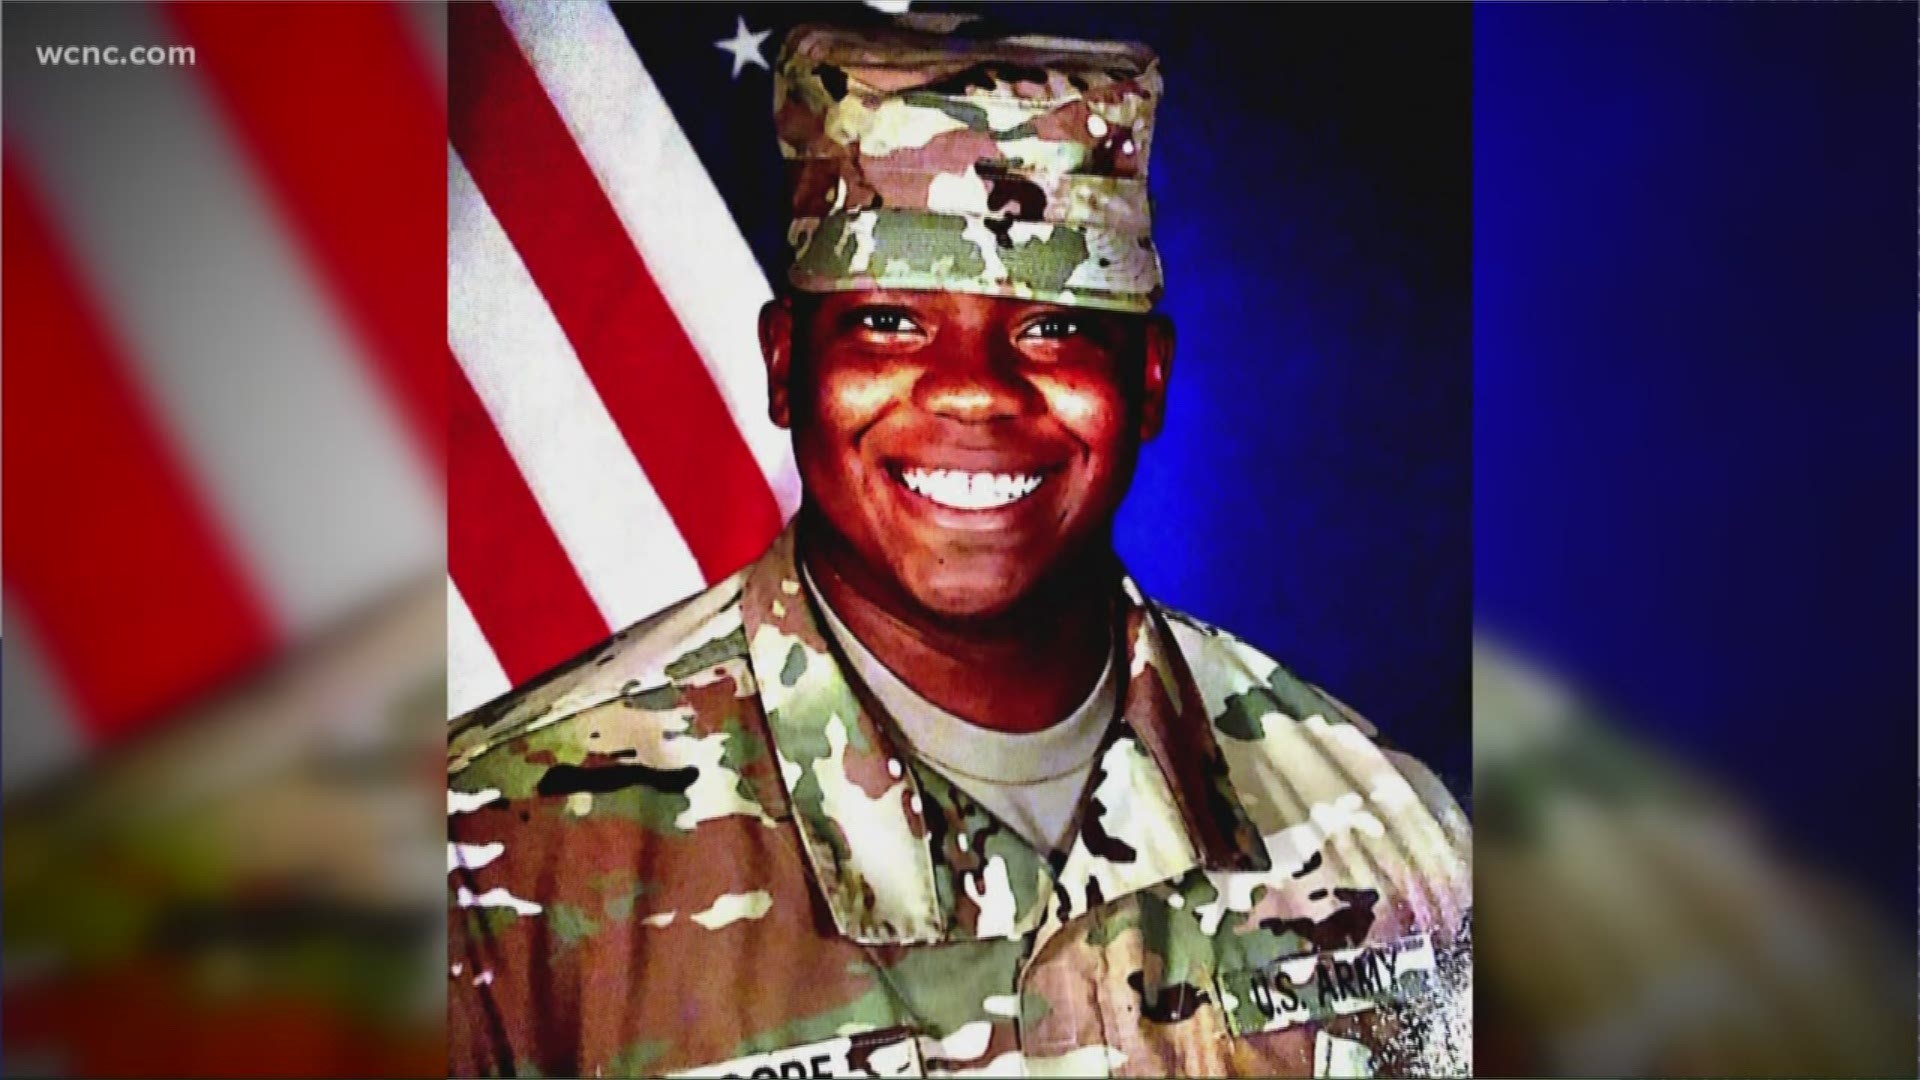 Spc. Antonio I. Moore of Wilmington, N.C. died in Deir ez Zor Province, Syria, during a rollover accident.